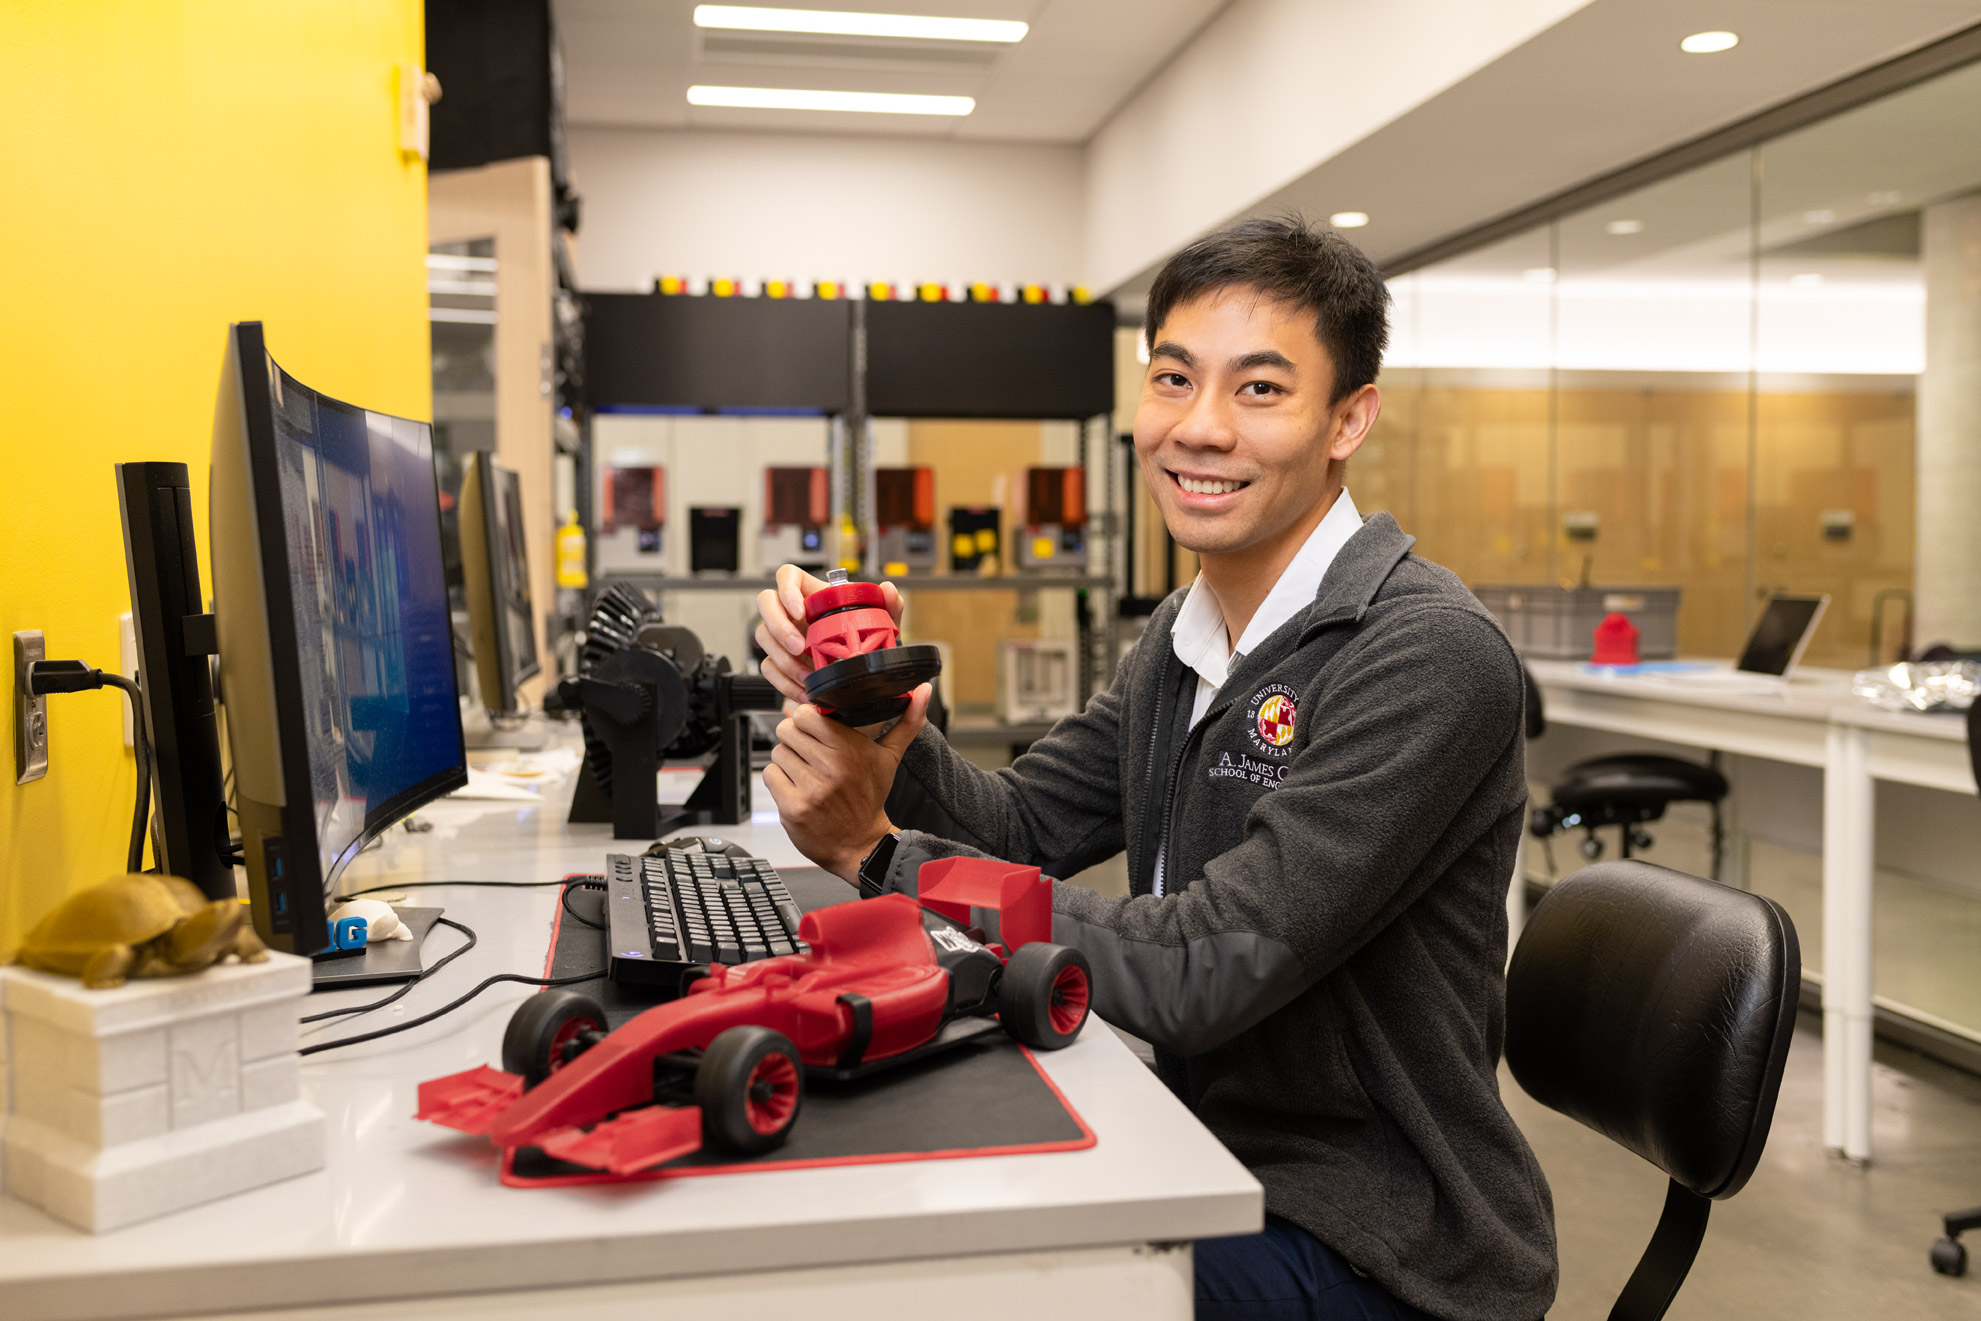 An engineering student holds 3-D printed models in a lab